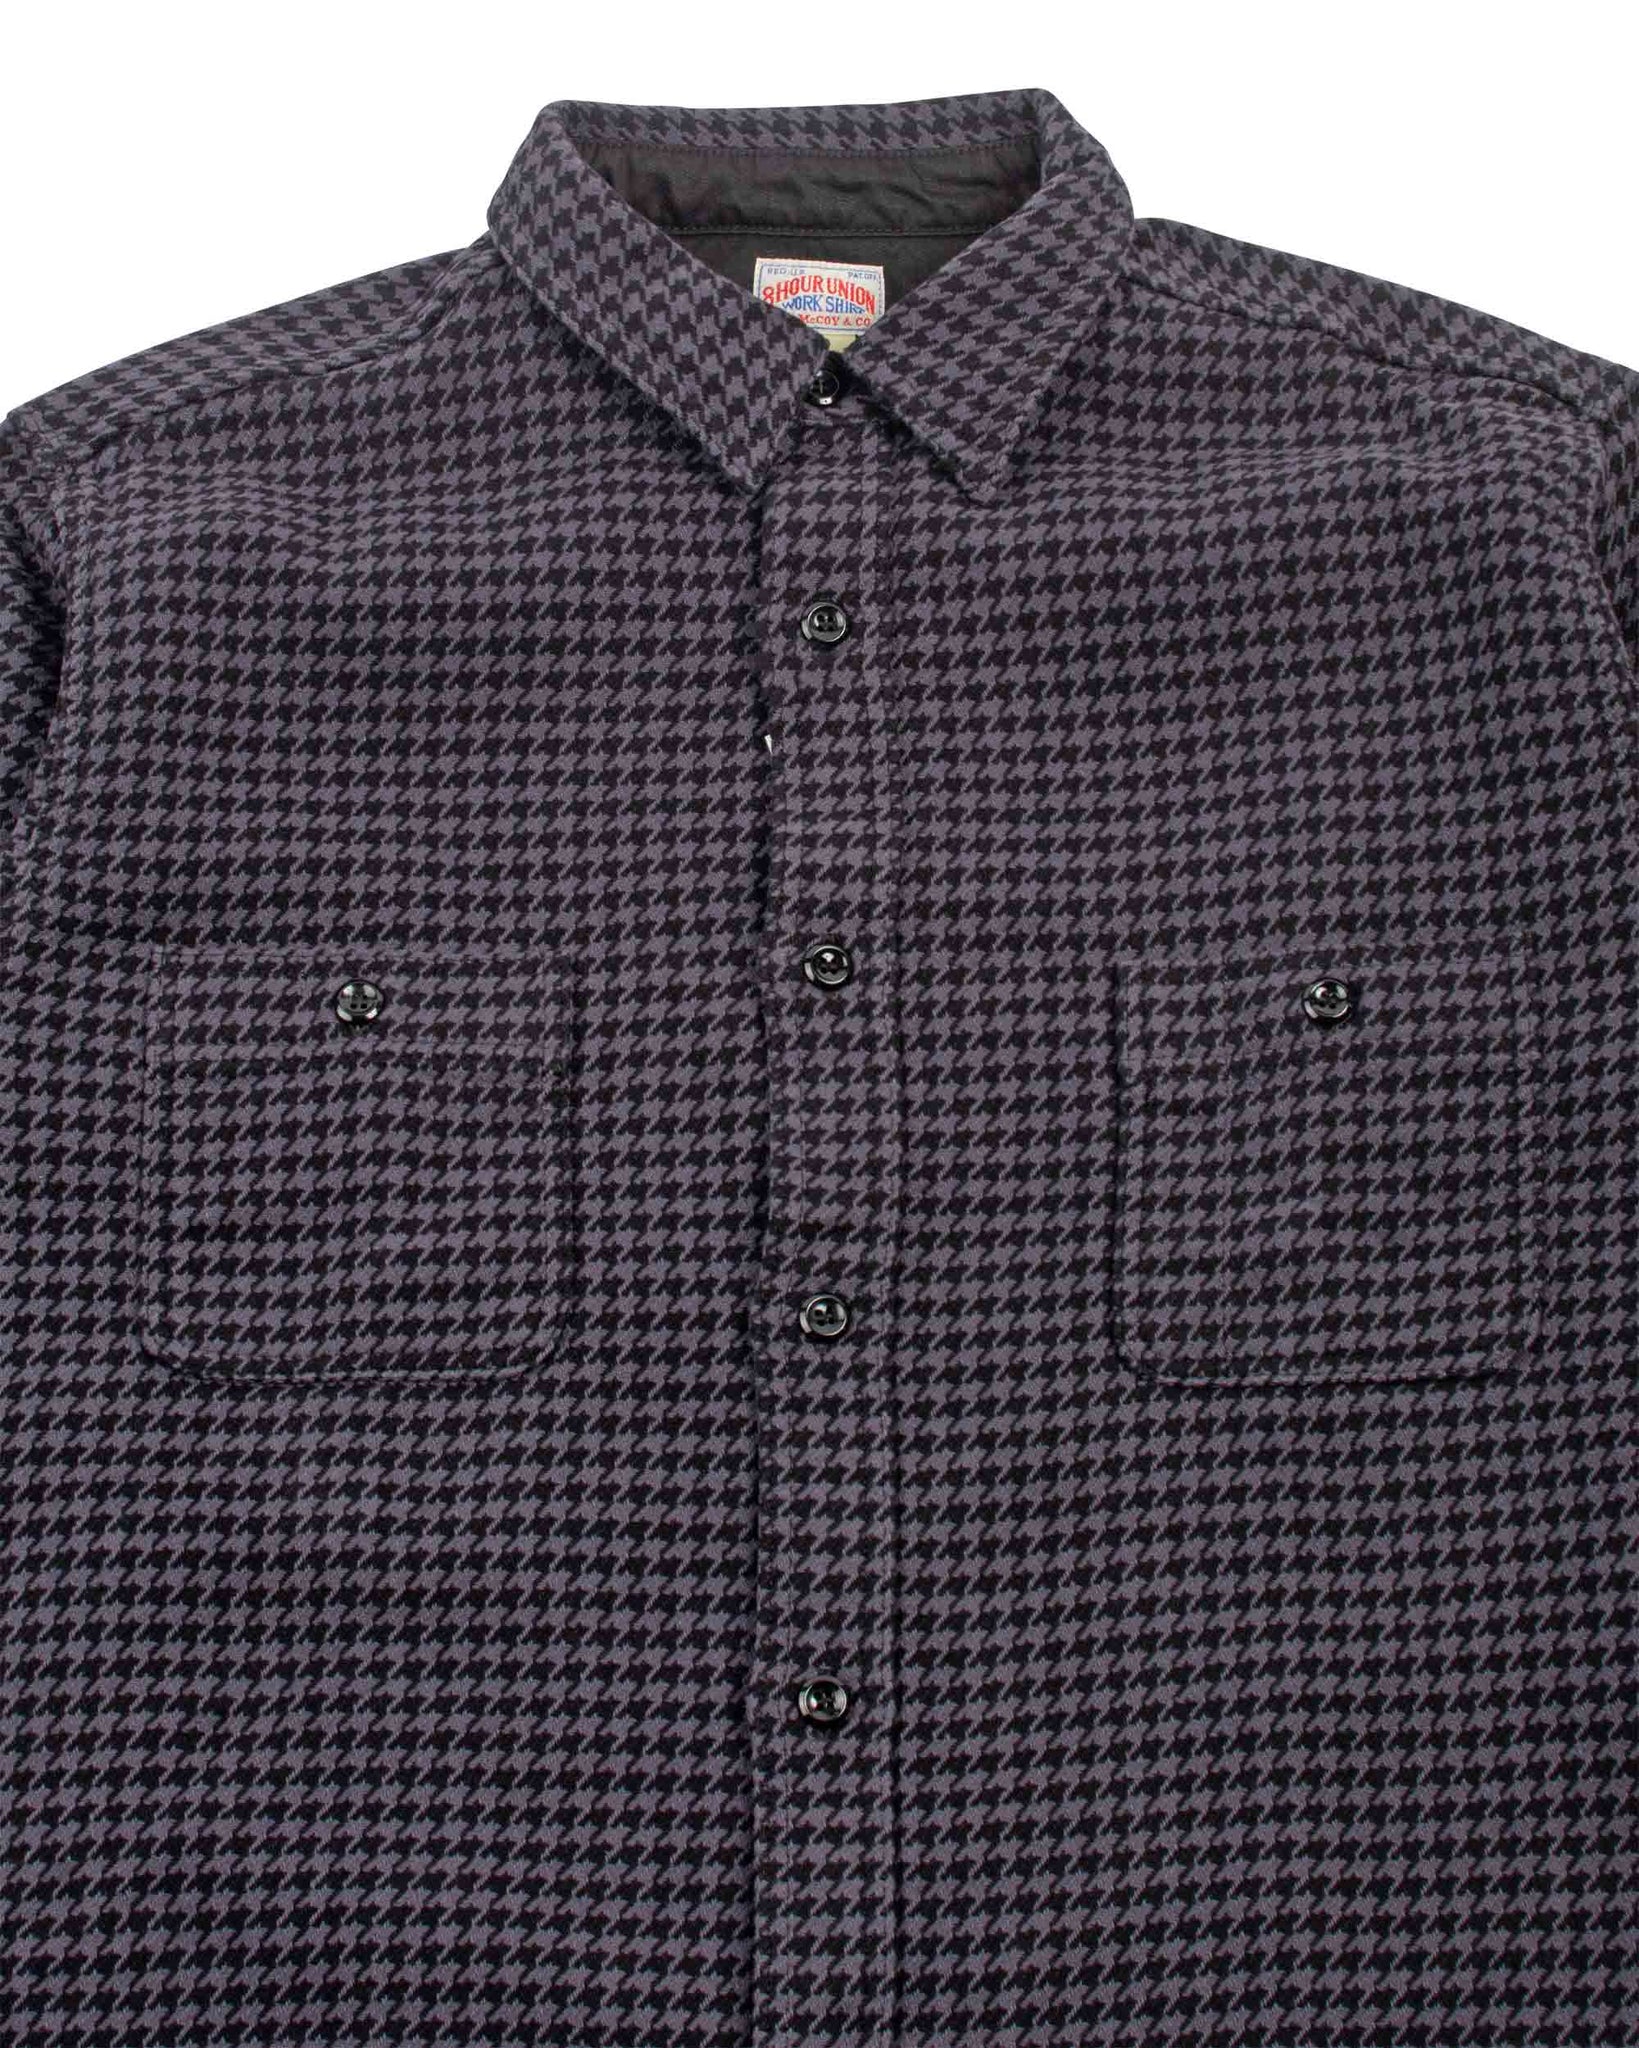 The Real McCoy's MS21102 8HU Houndstooth Flannel Shirt Chale Detail